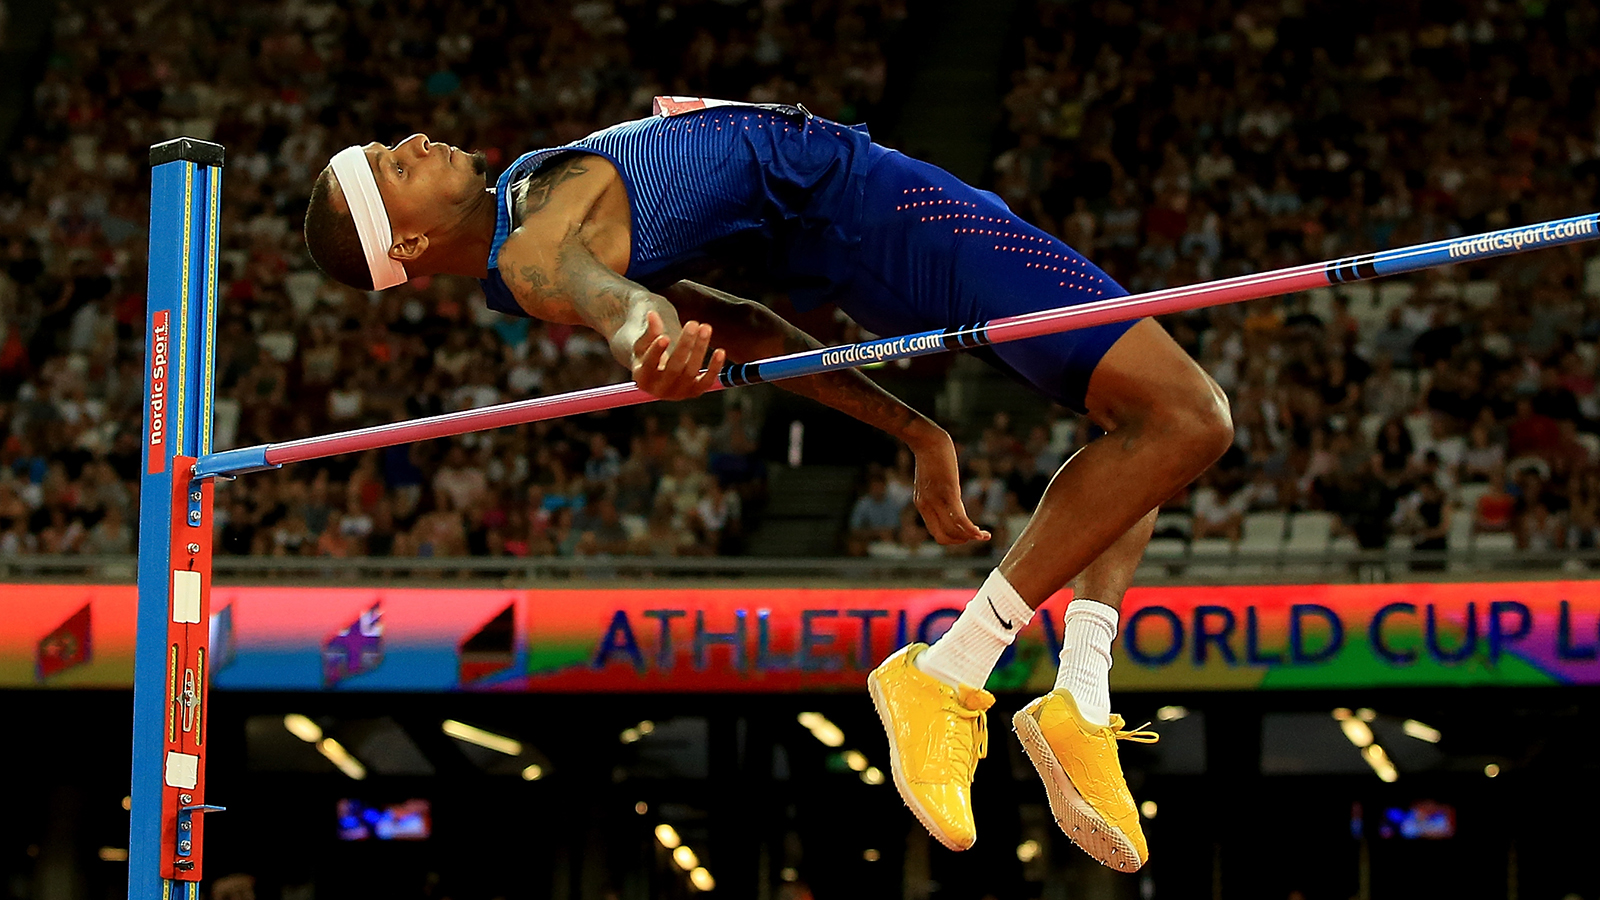 Robinson Takes First In High Jump At Athletics World Cup